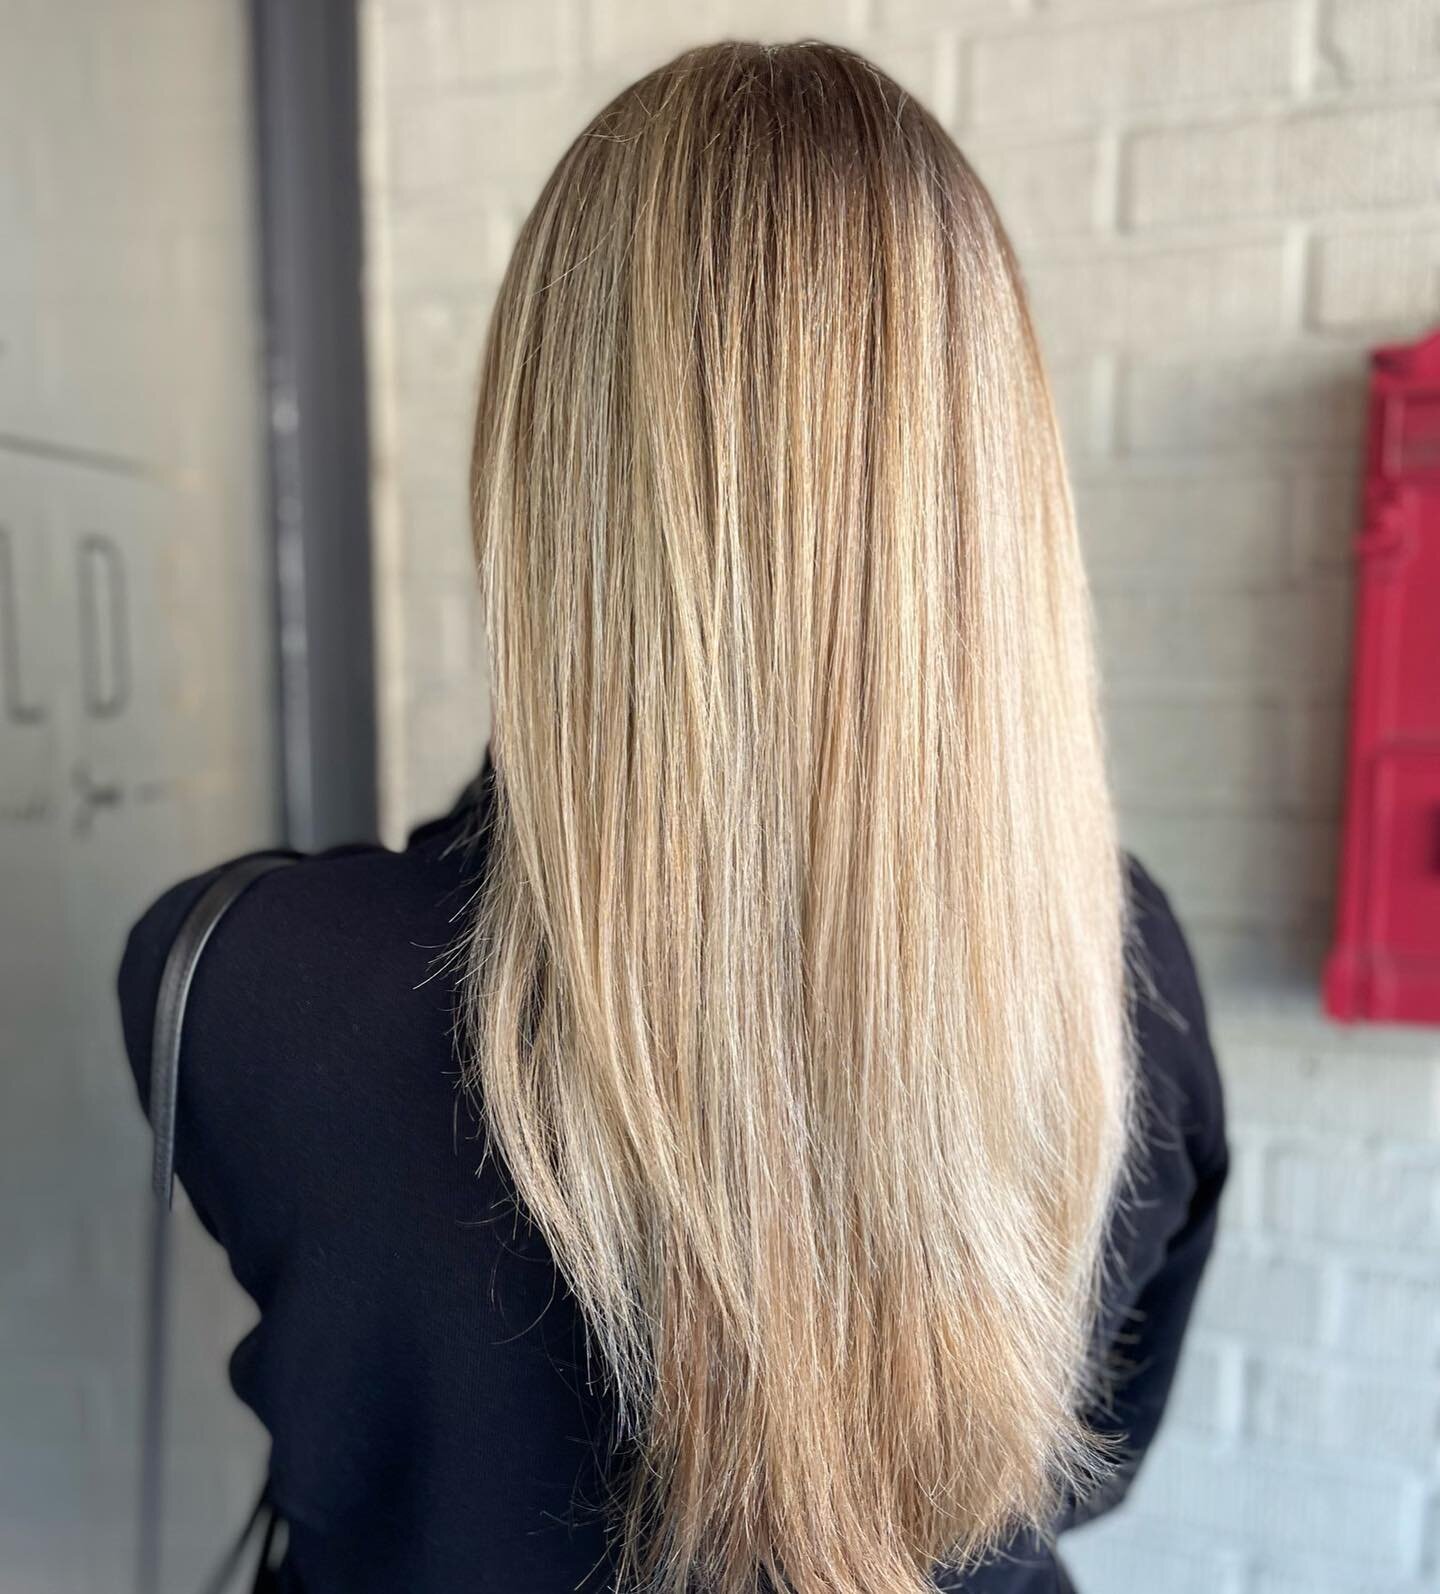 A buttery blonde for the start of the holiday season 🍁🦃🍂 @hairby_felicialynn added some lowlights and a root smudge to her clients hair after the summer sun left it lacking shine and dimension #redfieldsnaturalblonde